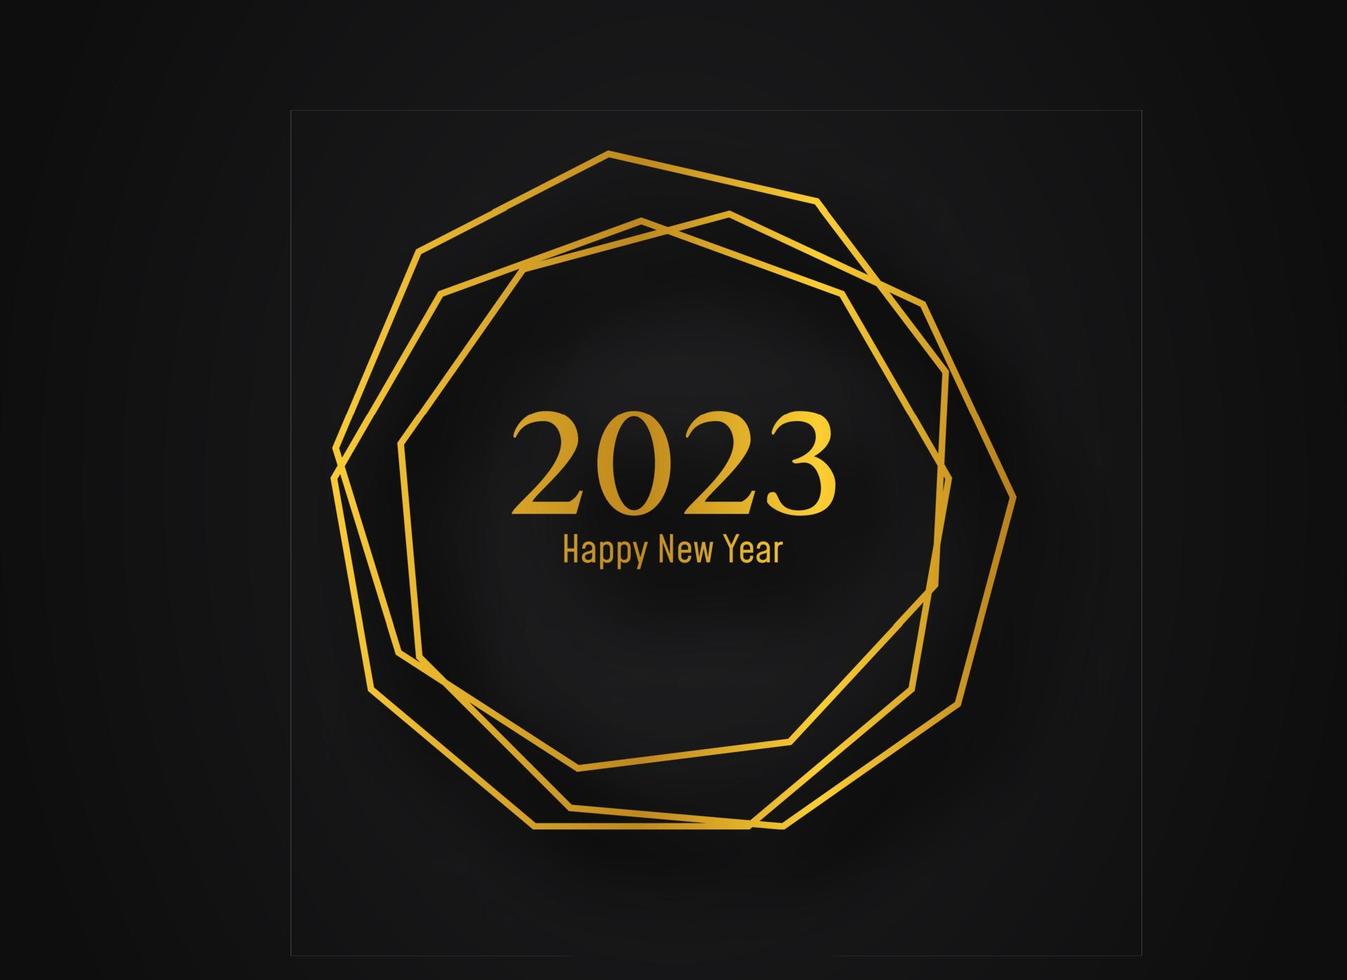 2023 Happy New Year gold geometric polygonal background vector